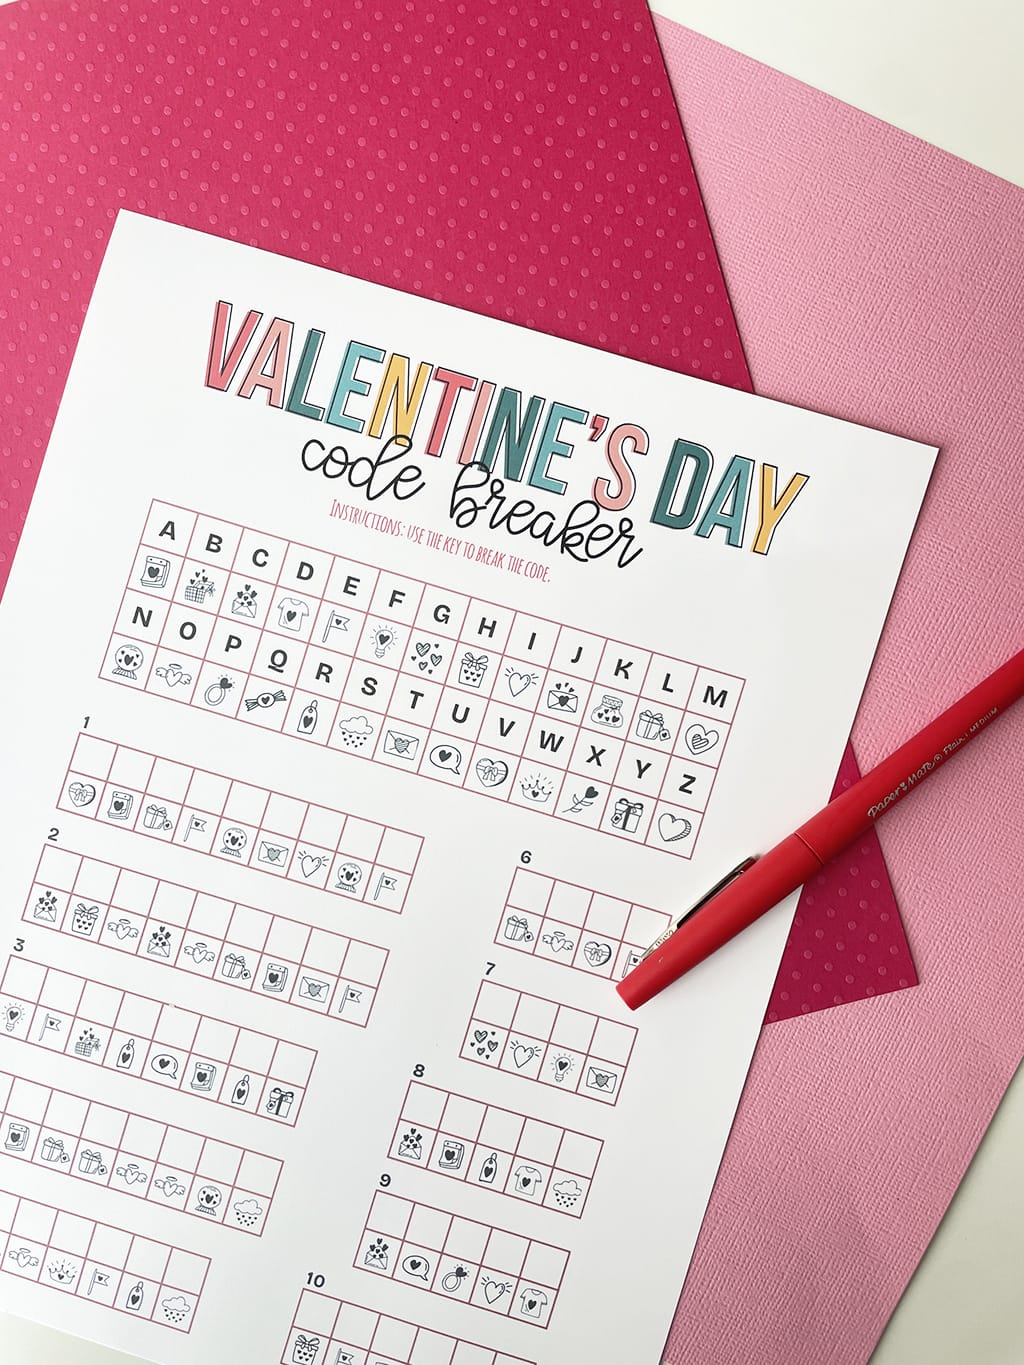 Printable of the Valentine's Day Code Breaker printed out and placed on a white table, with dark pink and light pink paper behind it. Red fine line marker on right and a valentine pencil on the left.